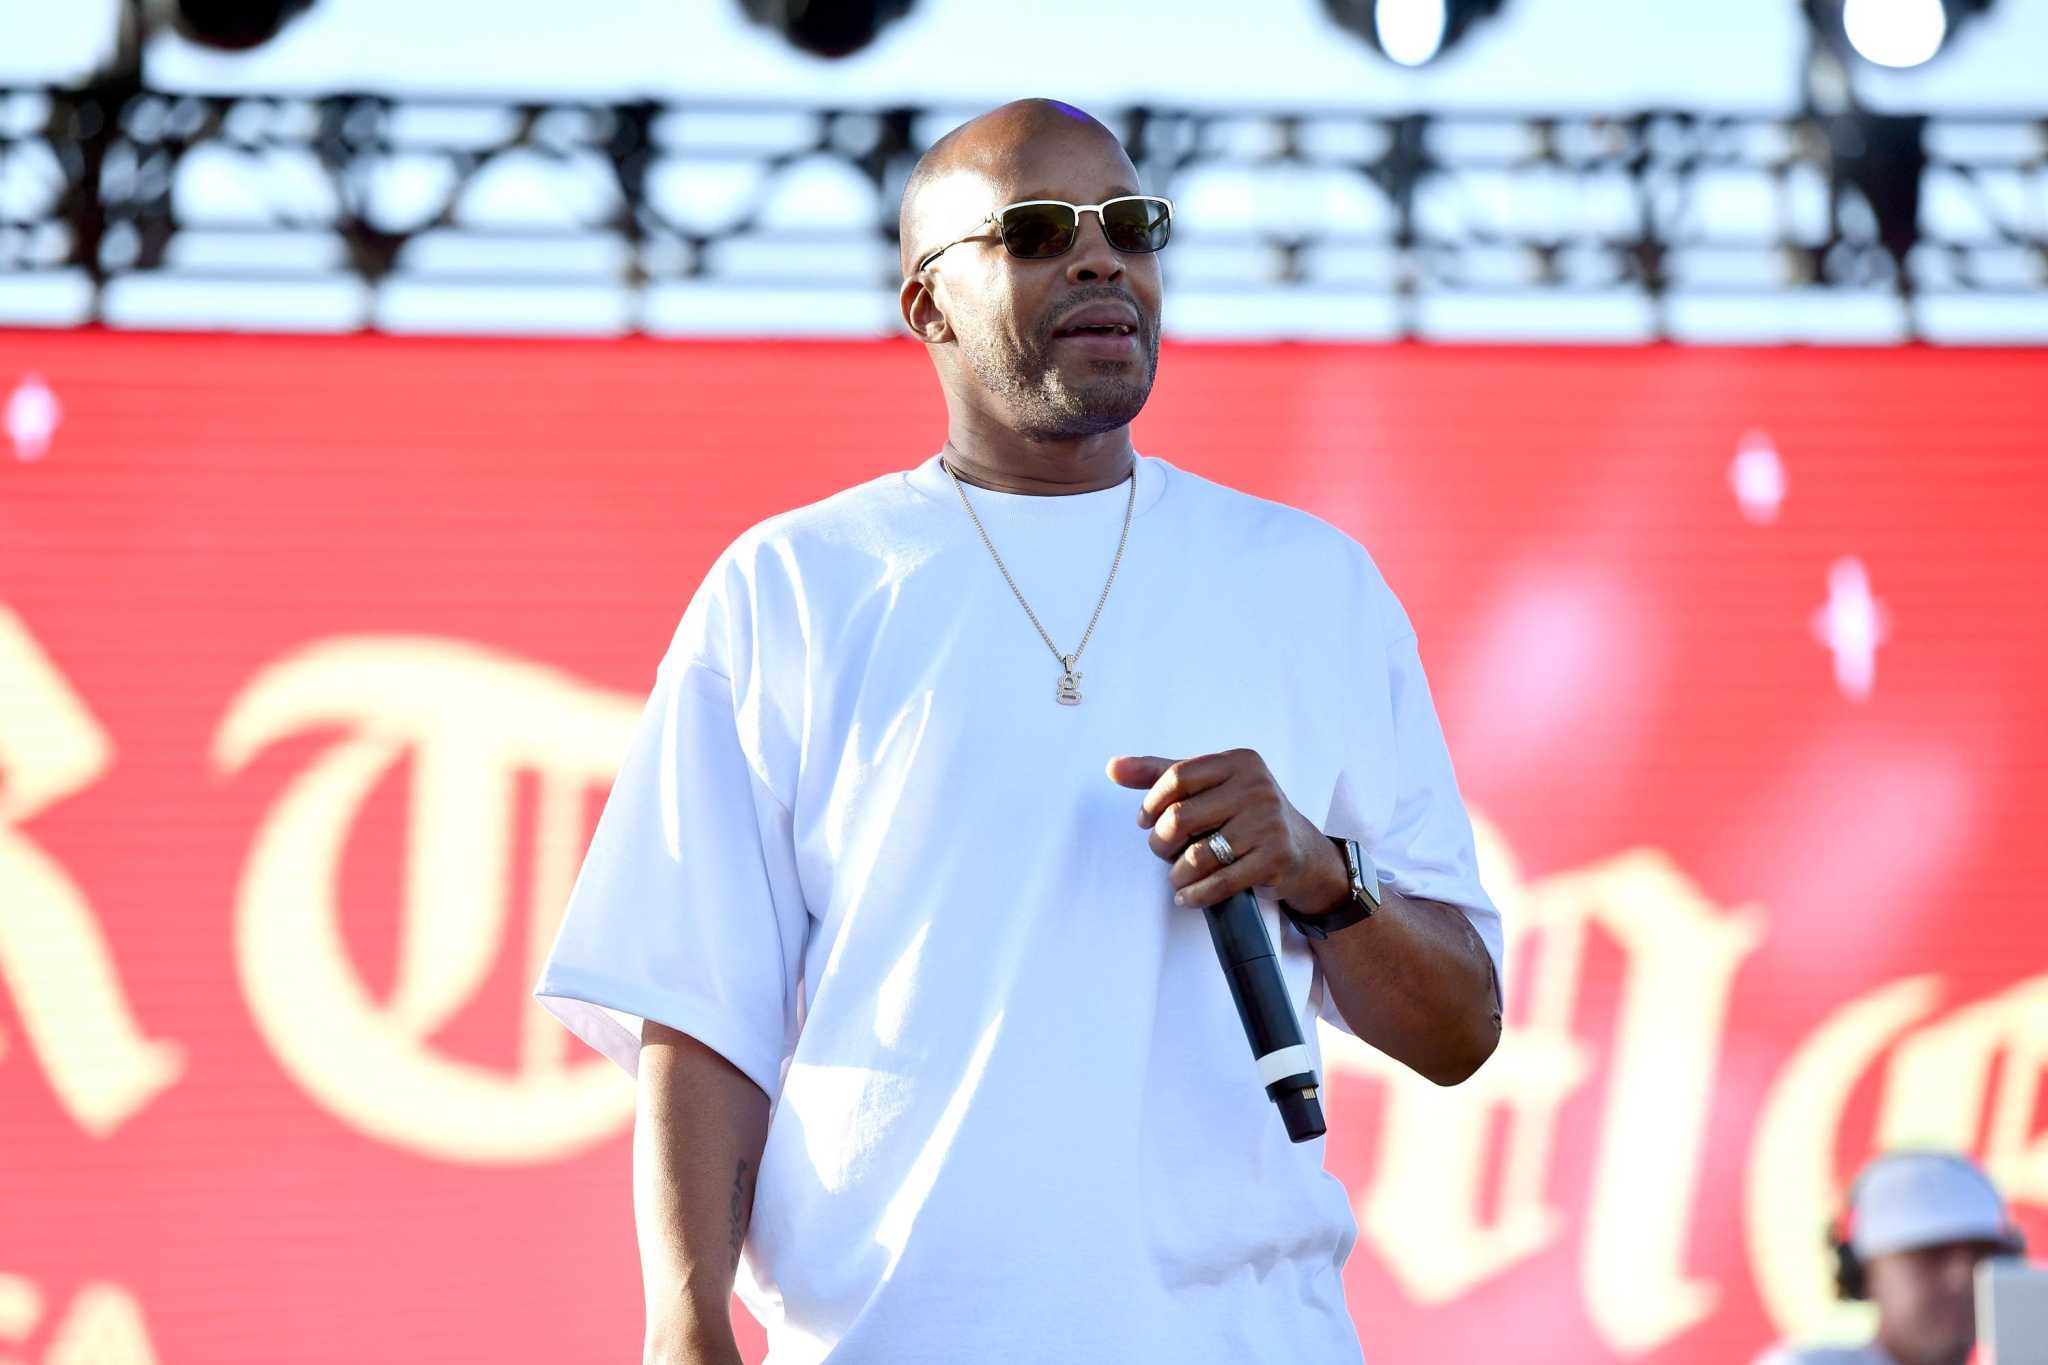 ’90s rap star added to Fiesta Oyster Bake 2019 lineup